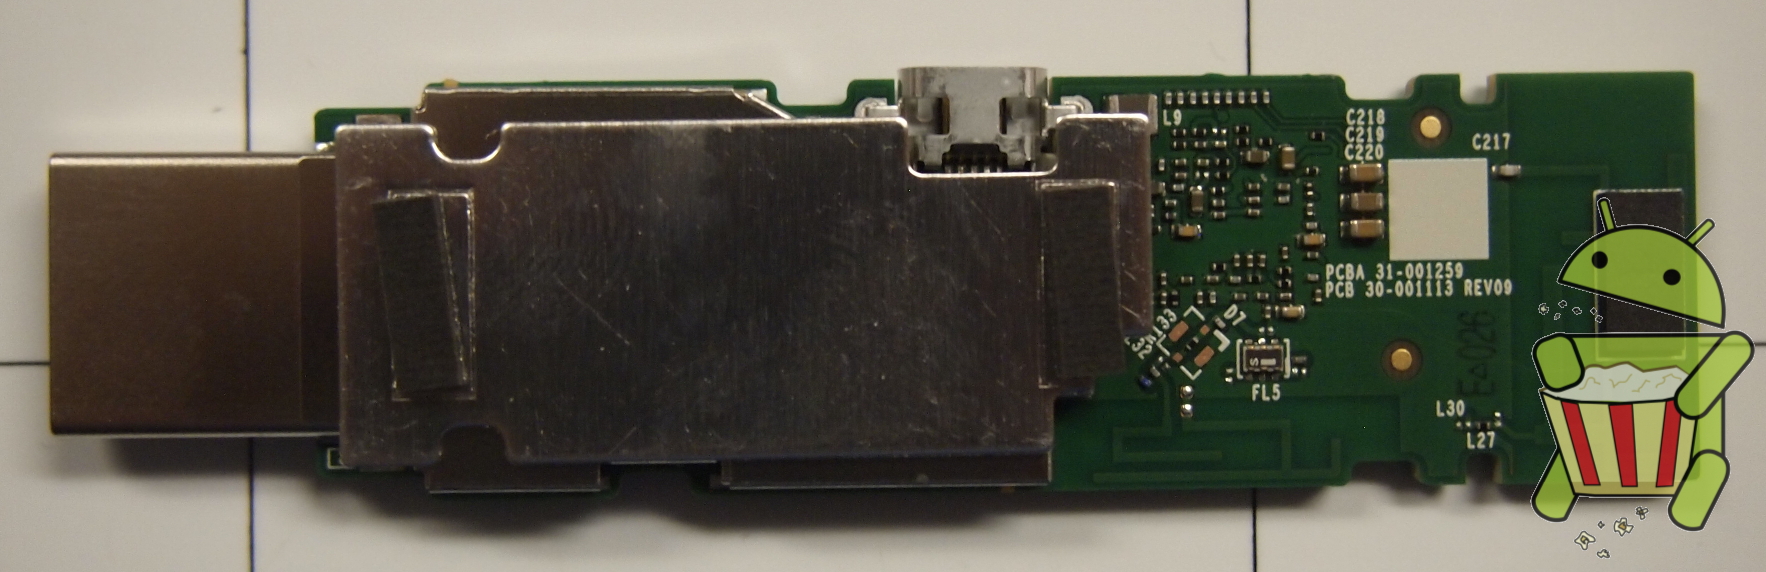 Amazon Fire TV Stick Board Top Pads Removed.JPG